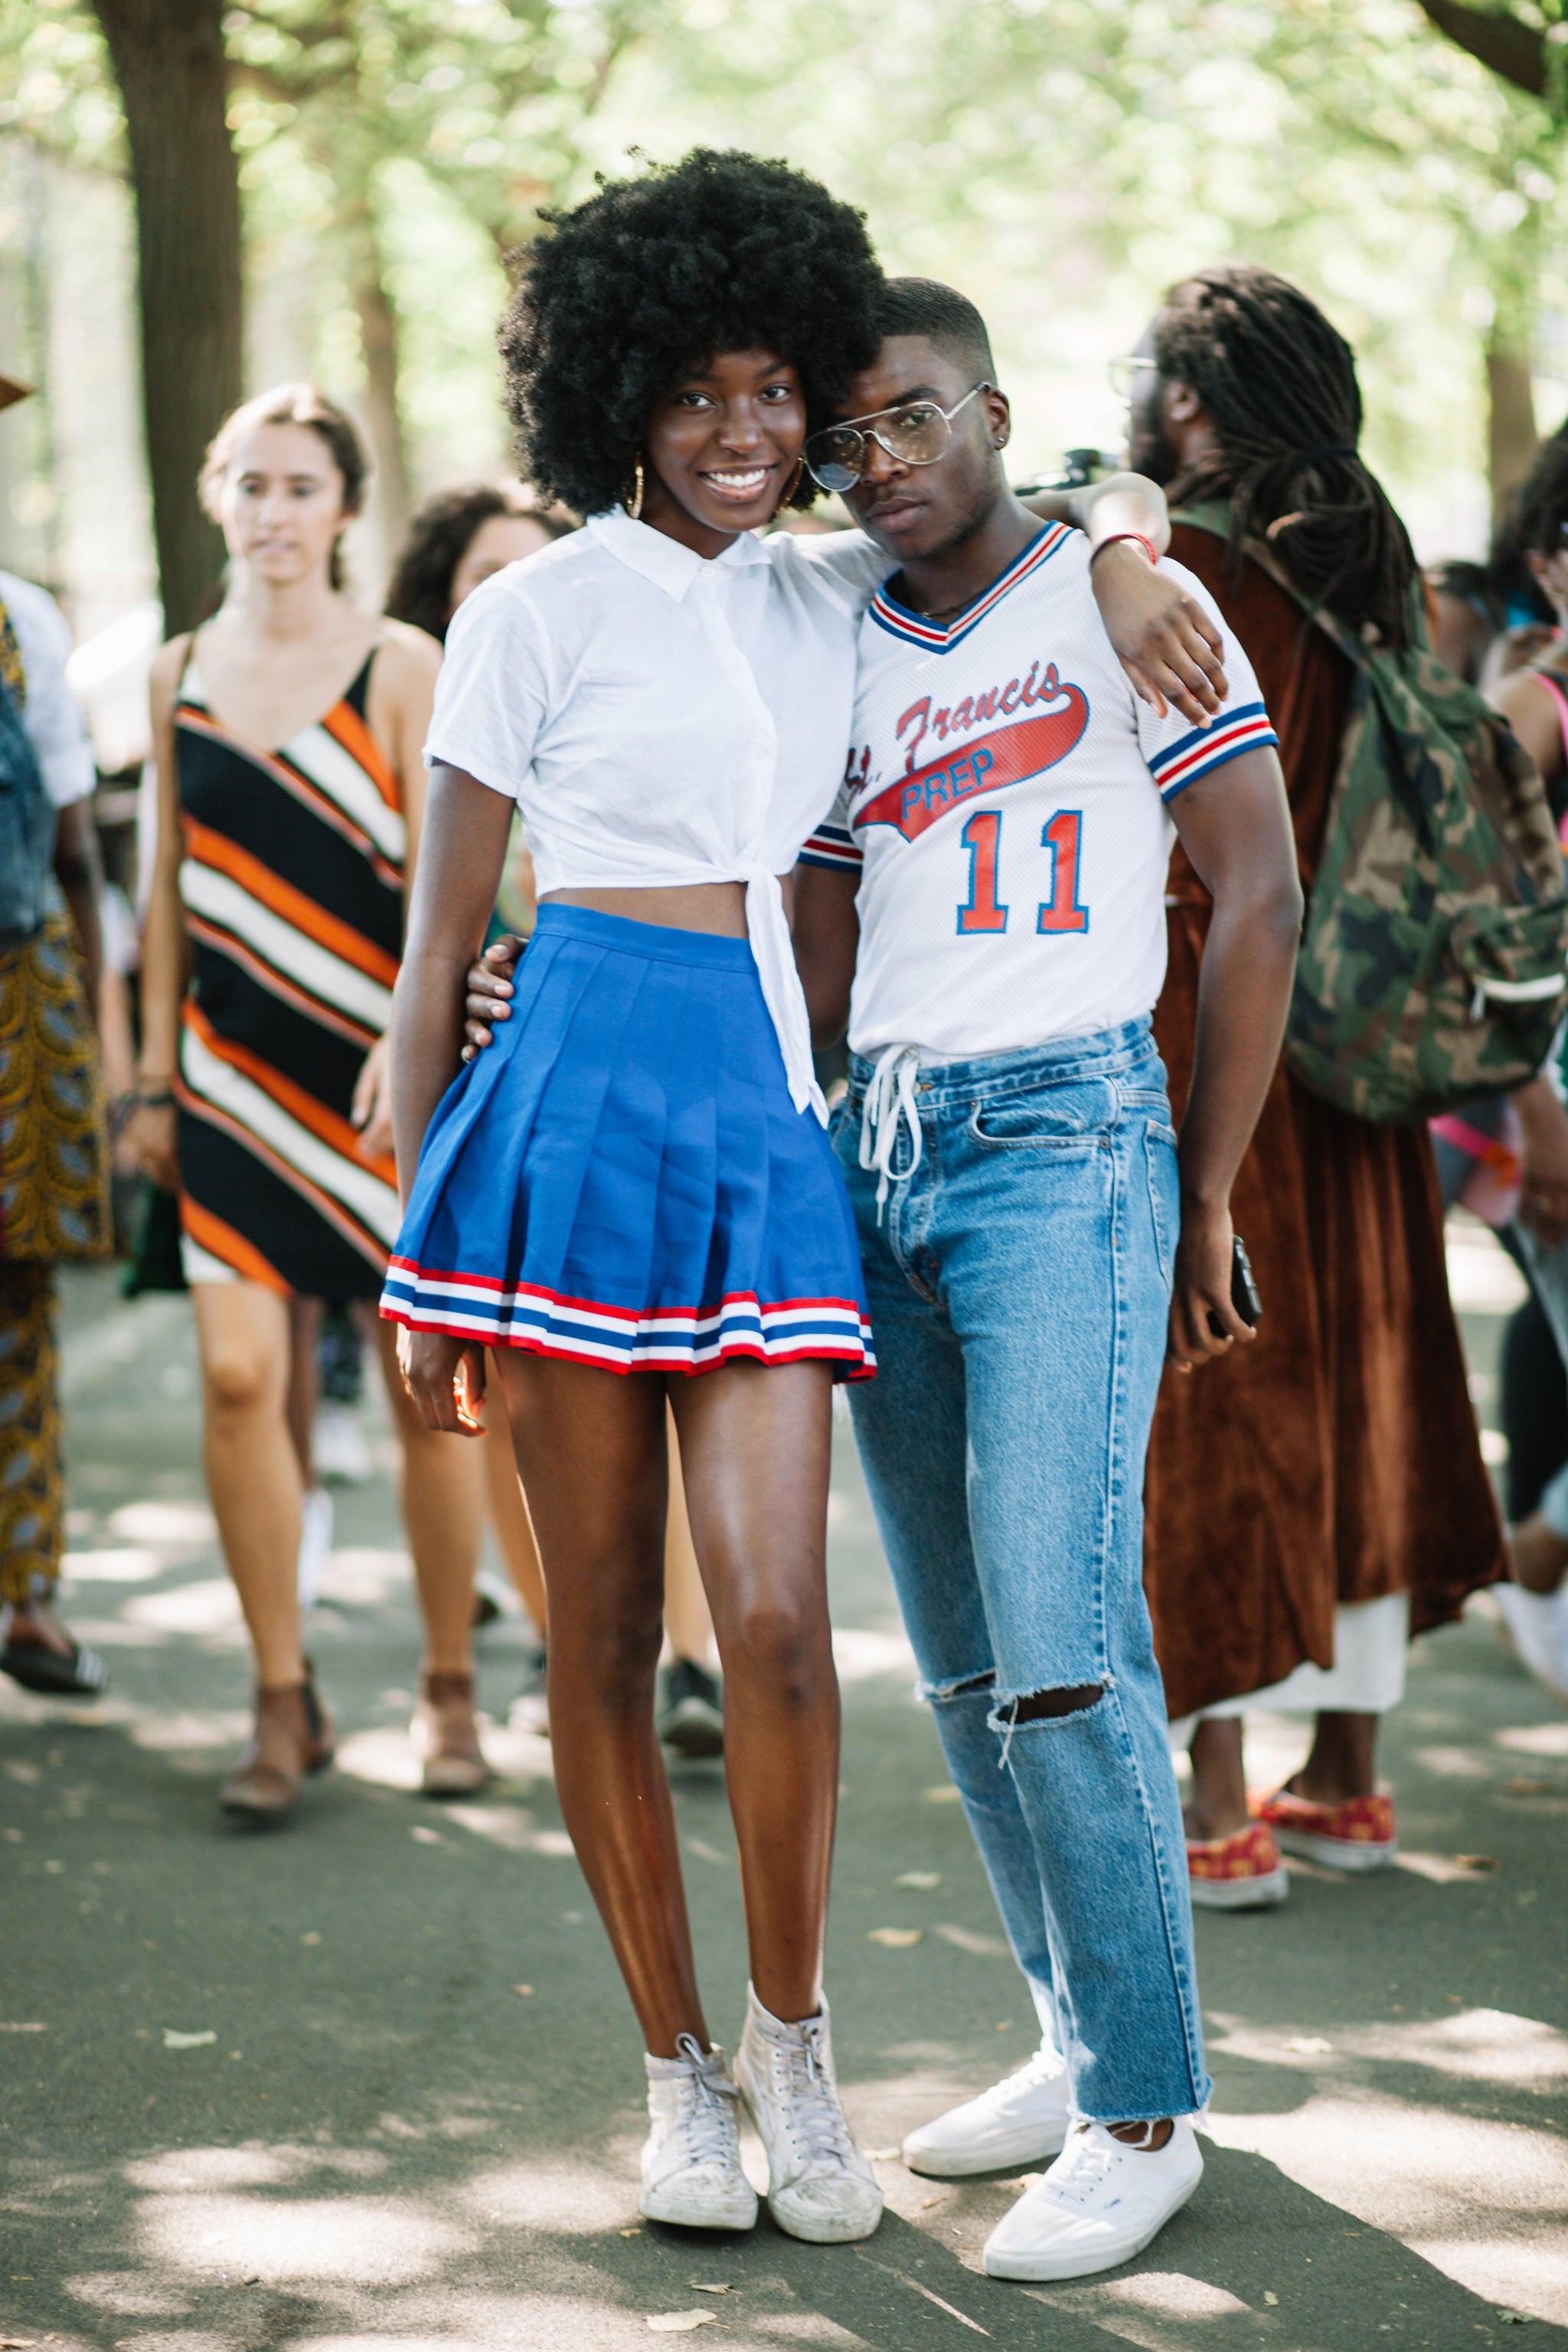 These Are the 100 Street Style Looks That Reigned Supreme in 2016
